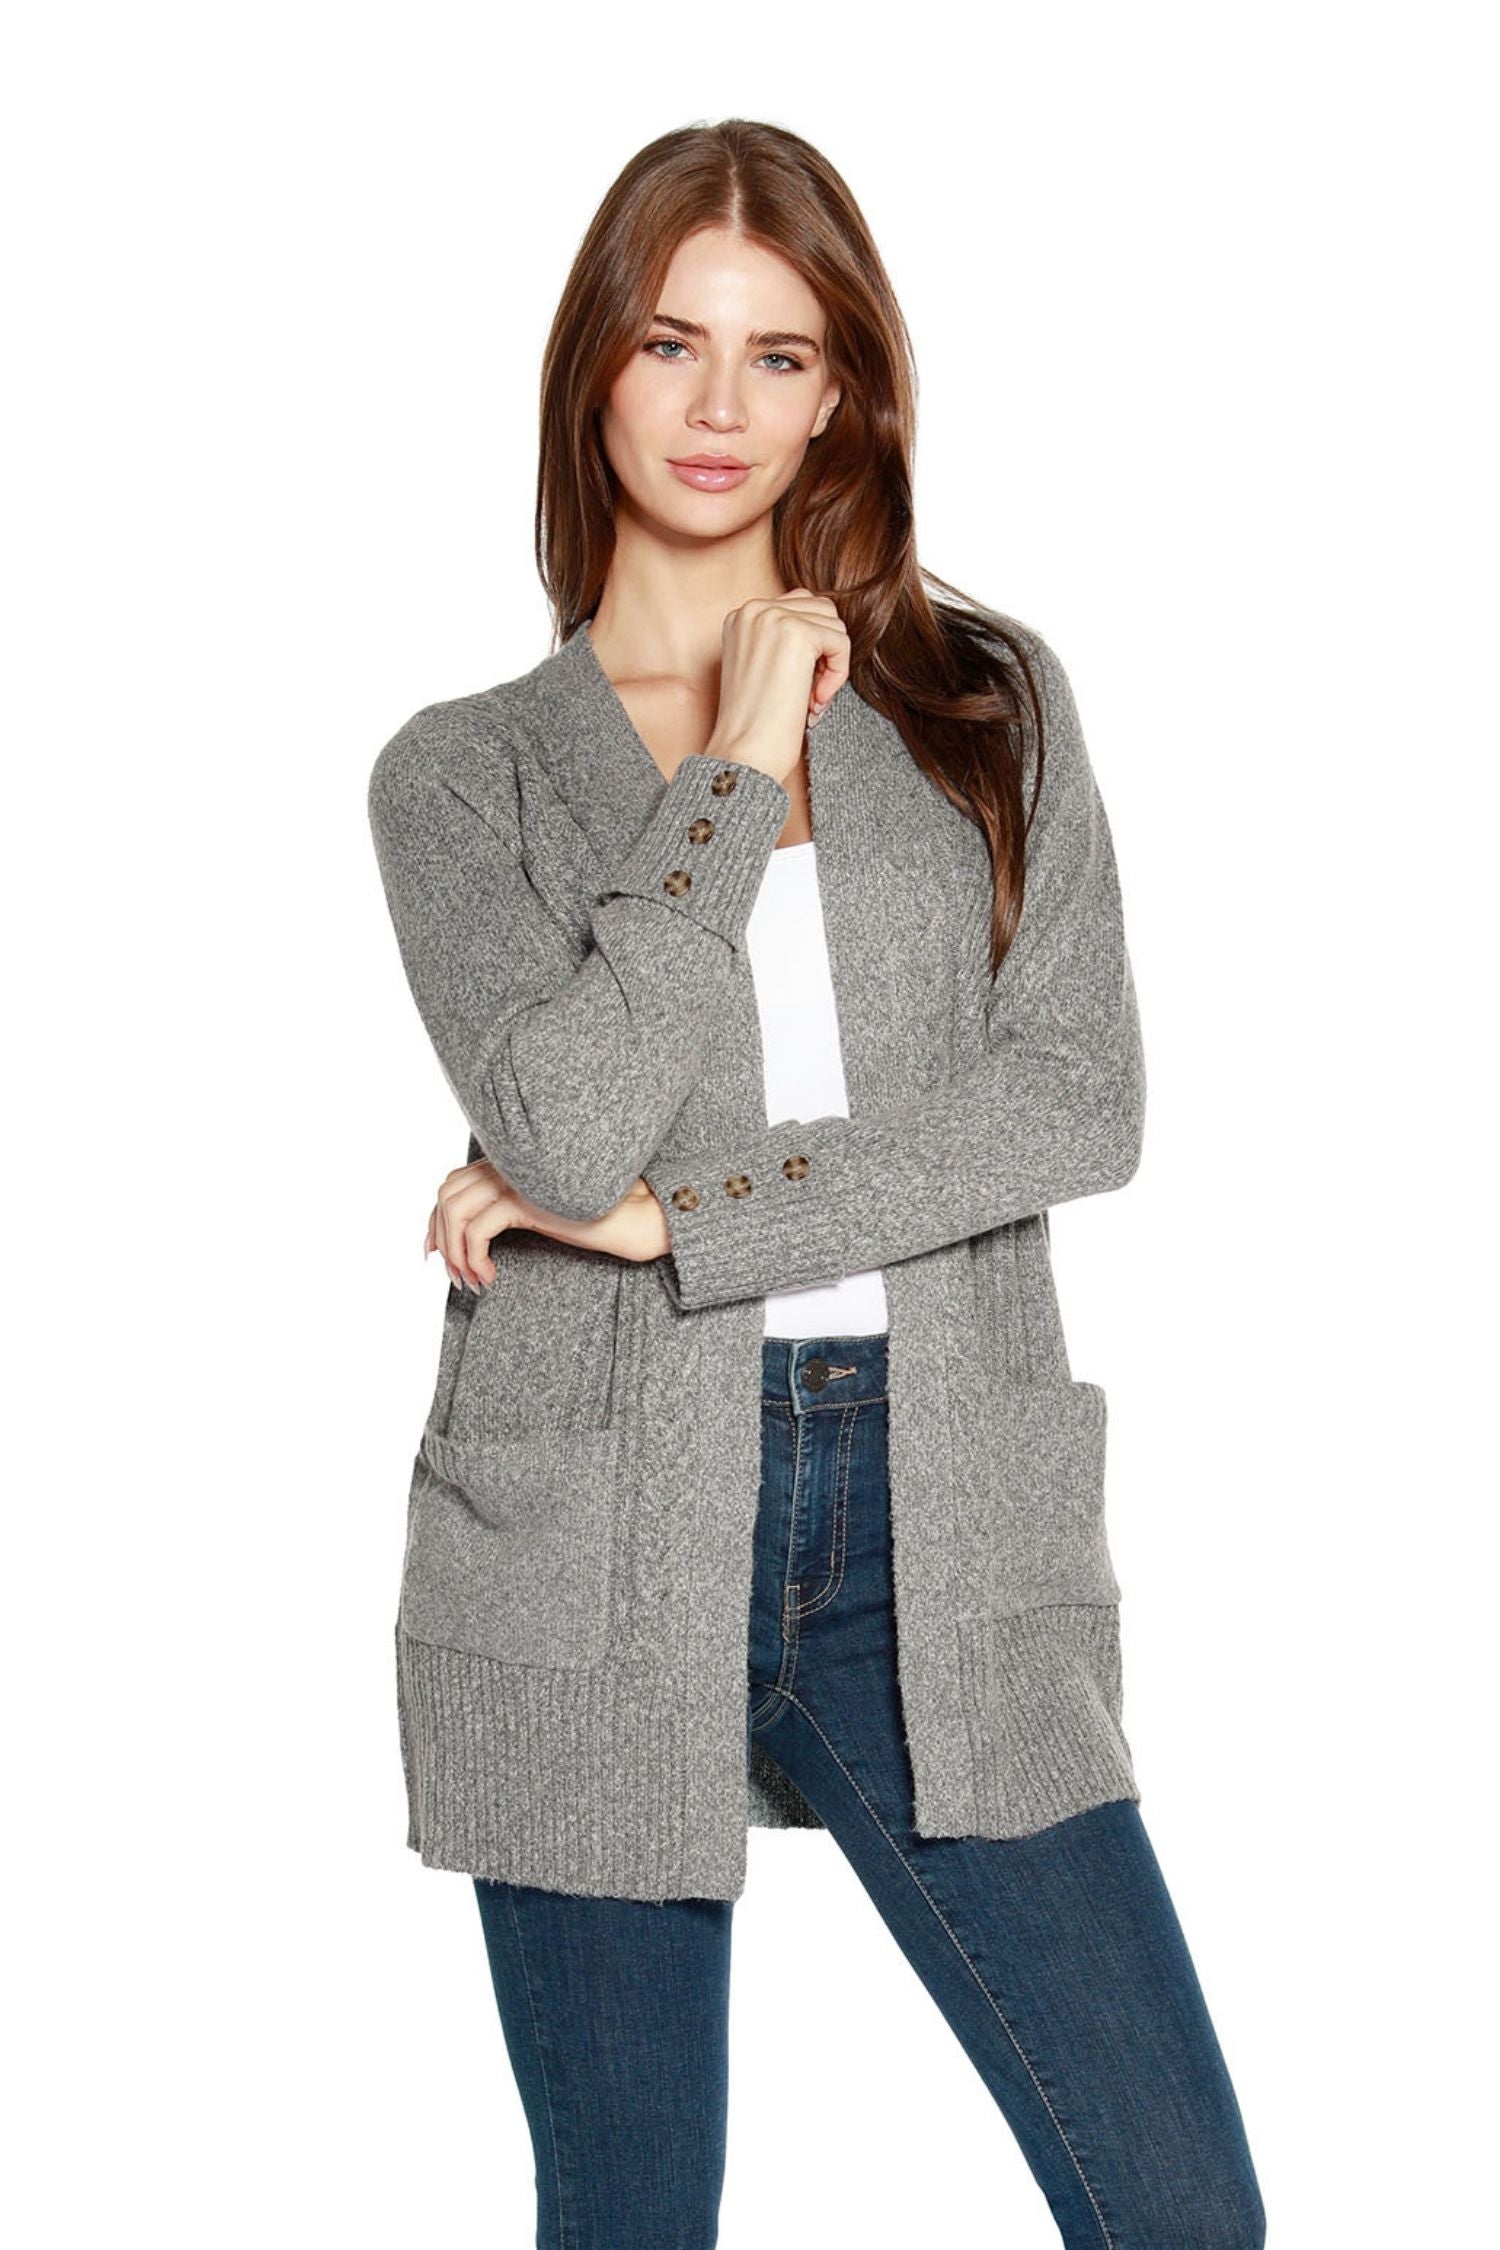 Belldini Women's Cardigan Sweater with Pockets - Lightweight, Ribbed Cable  Knit – belldini